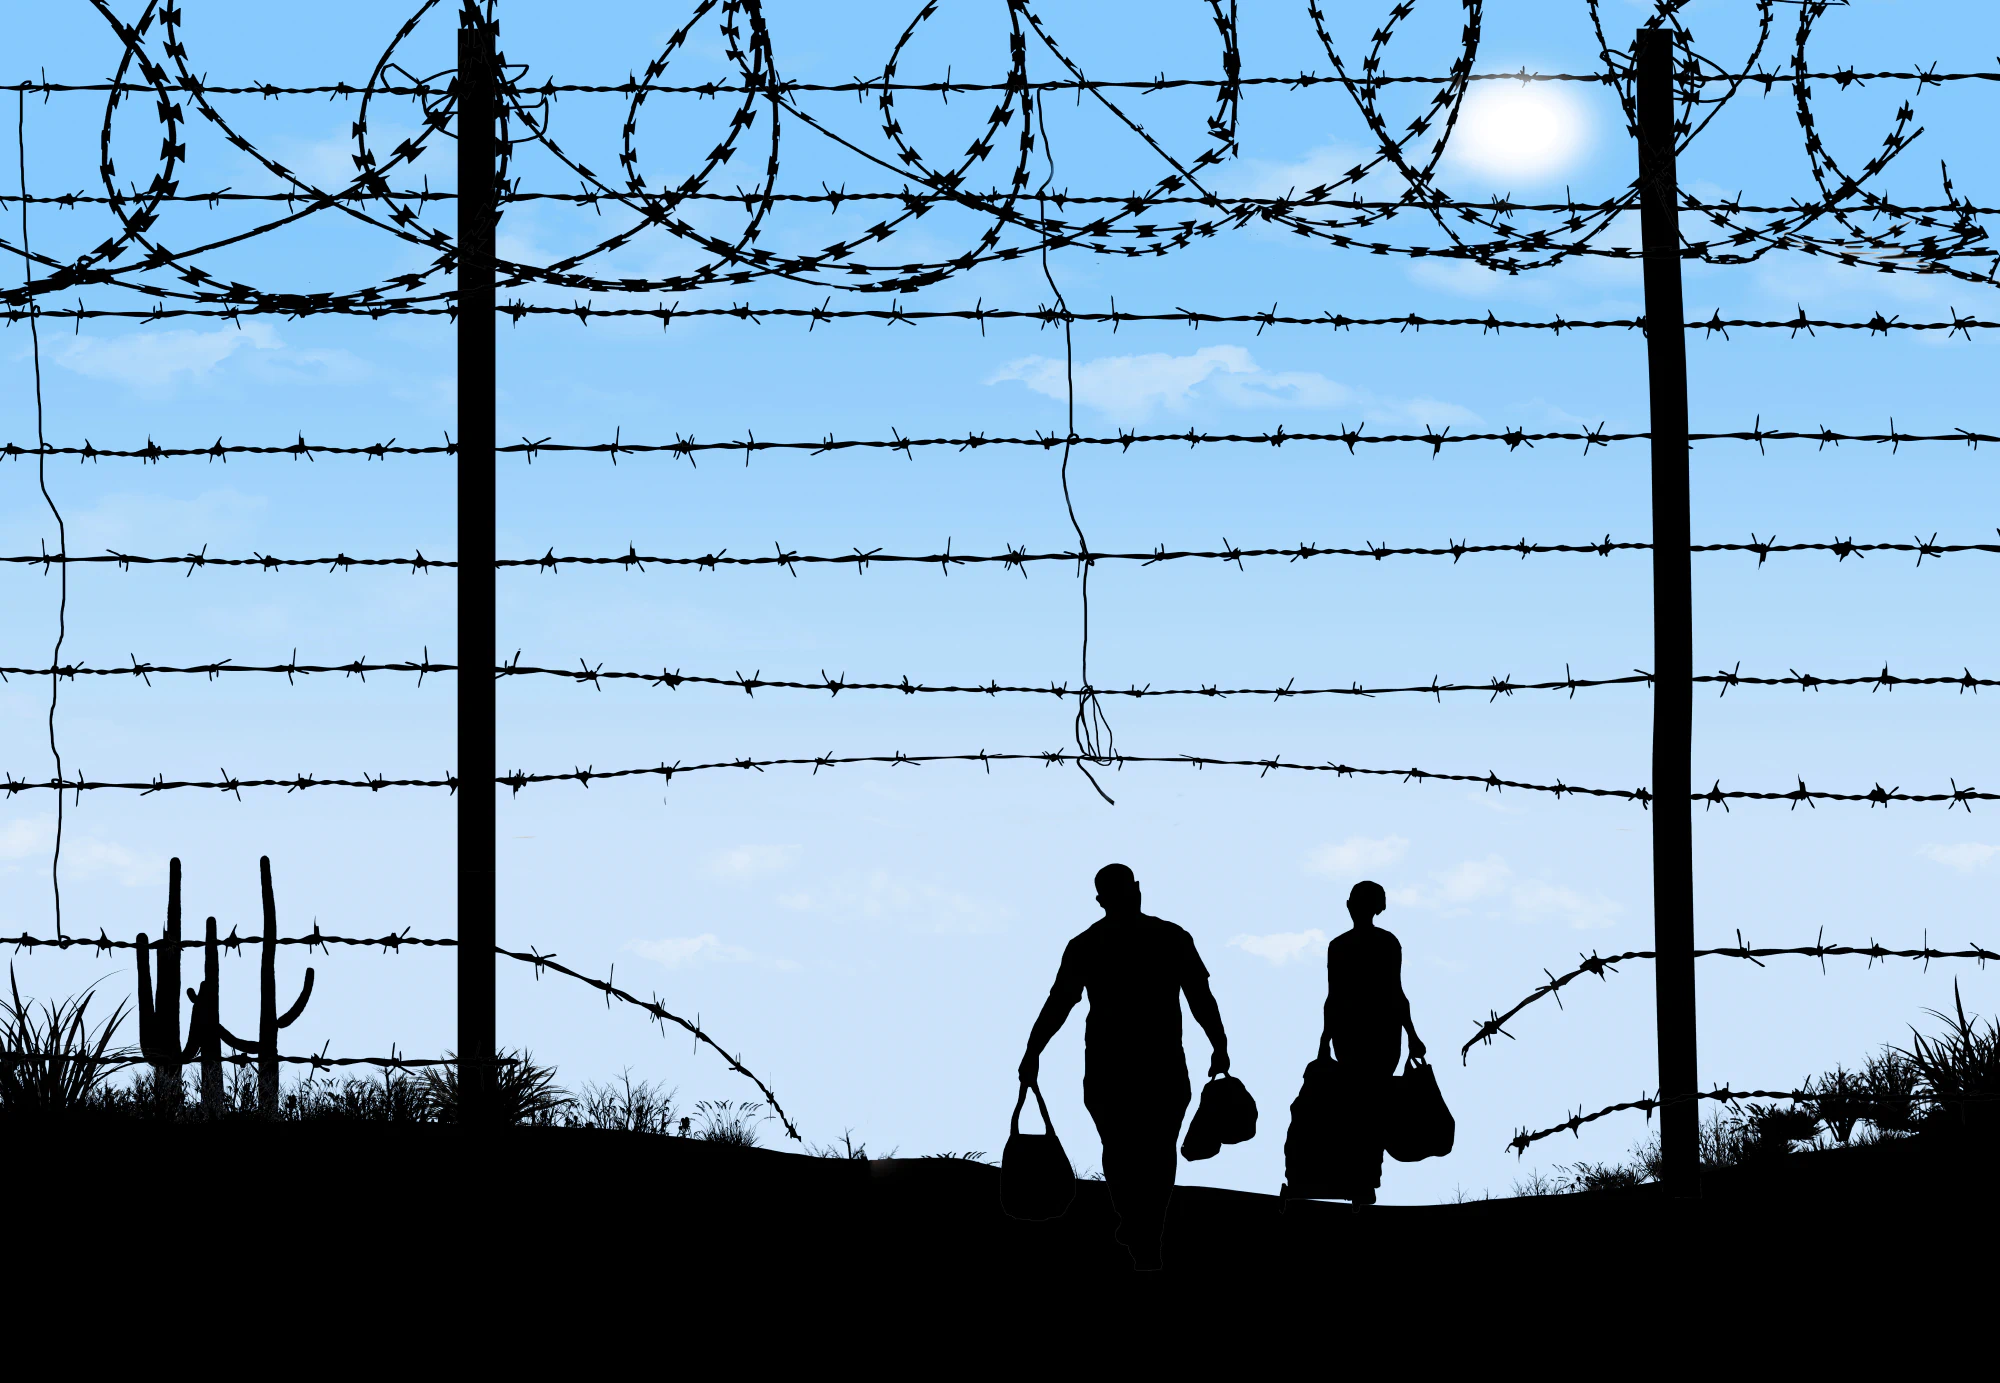 Silhouette of two people crossing through a barbed fence.